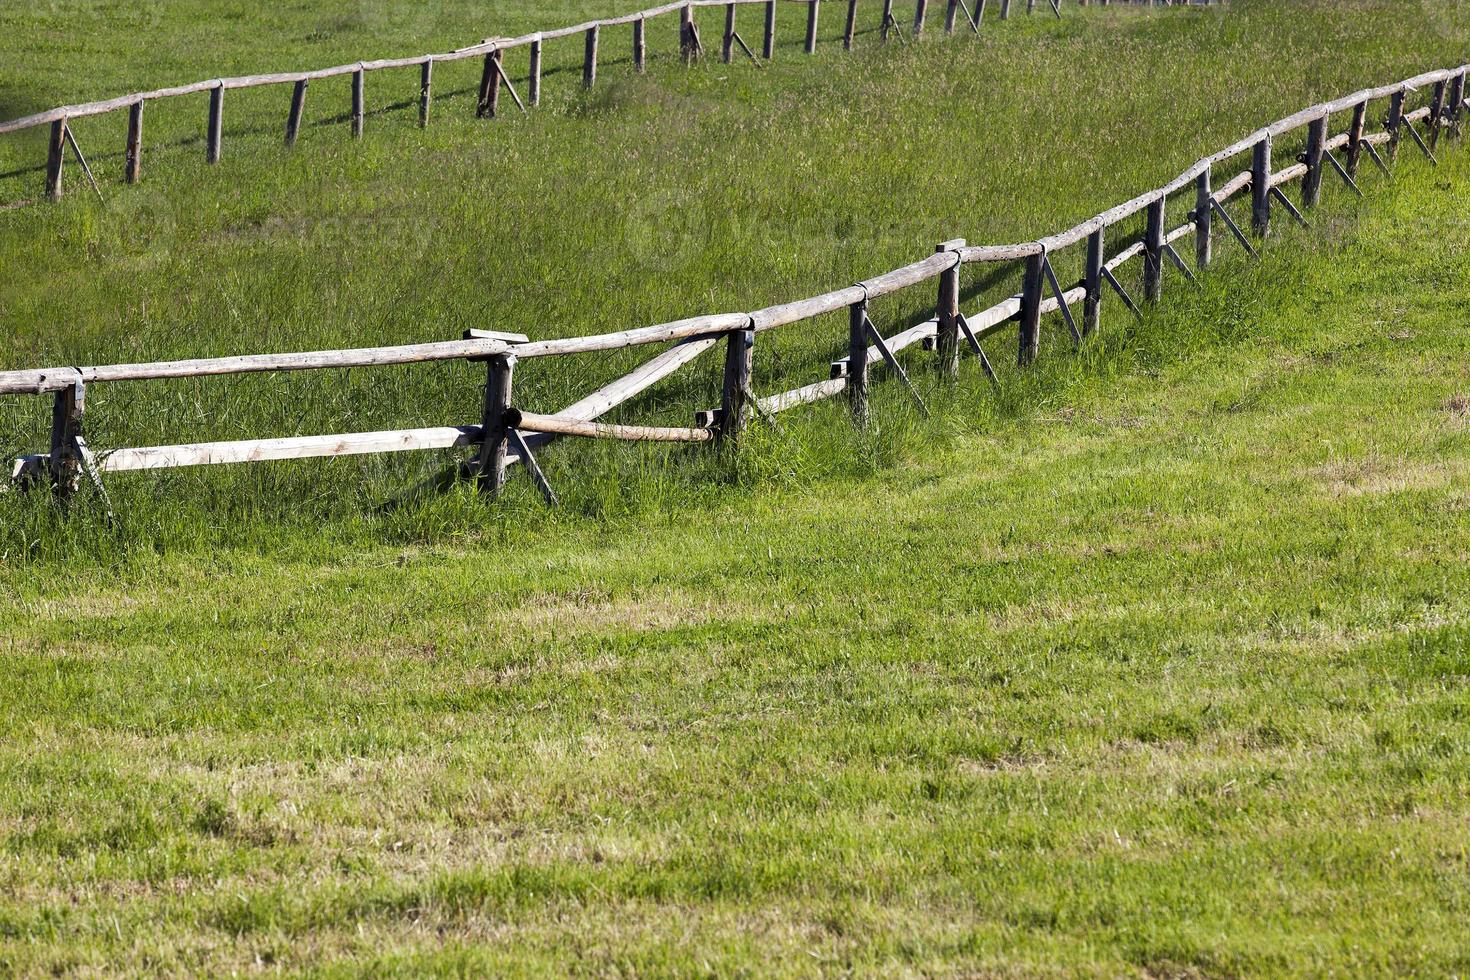 wooden fence on the farm photo